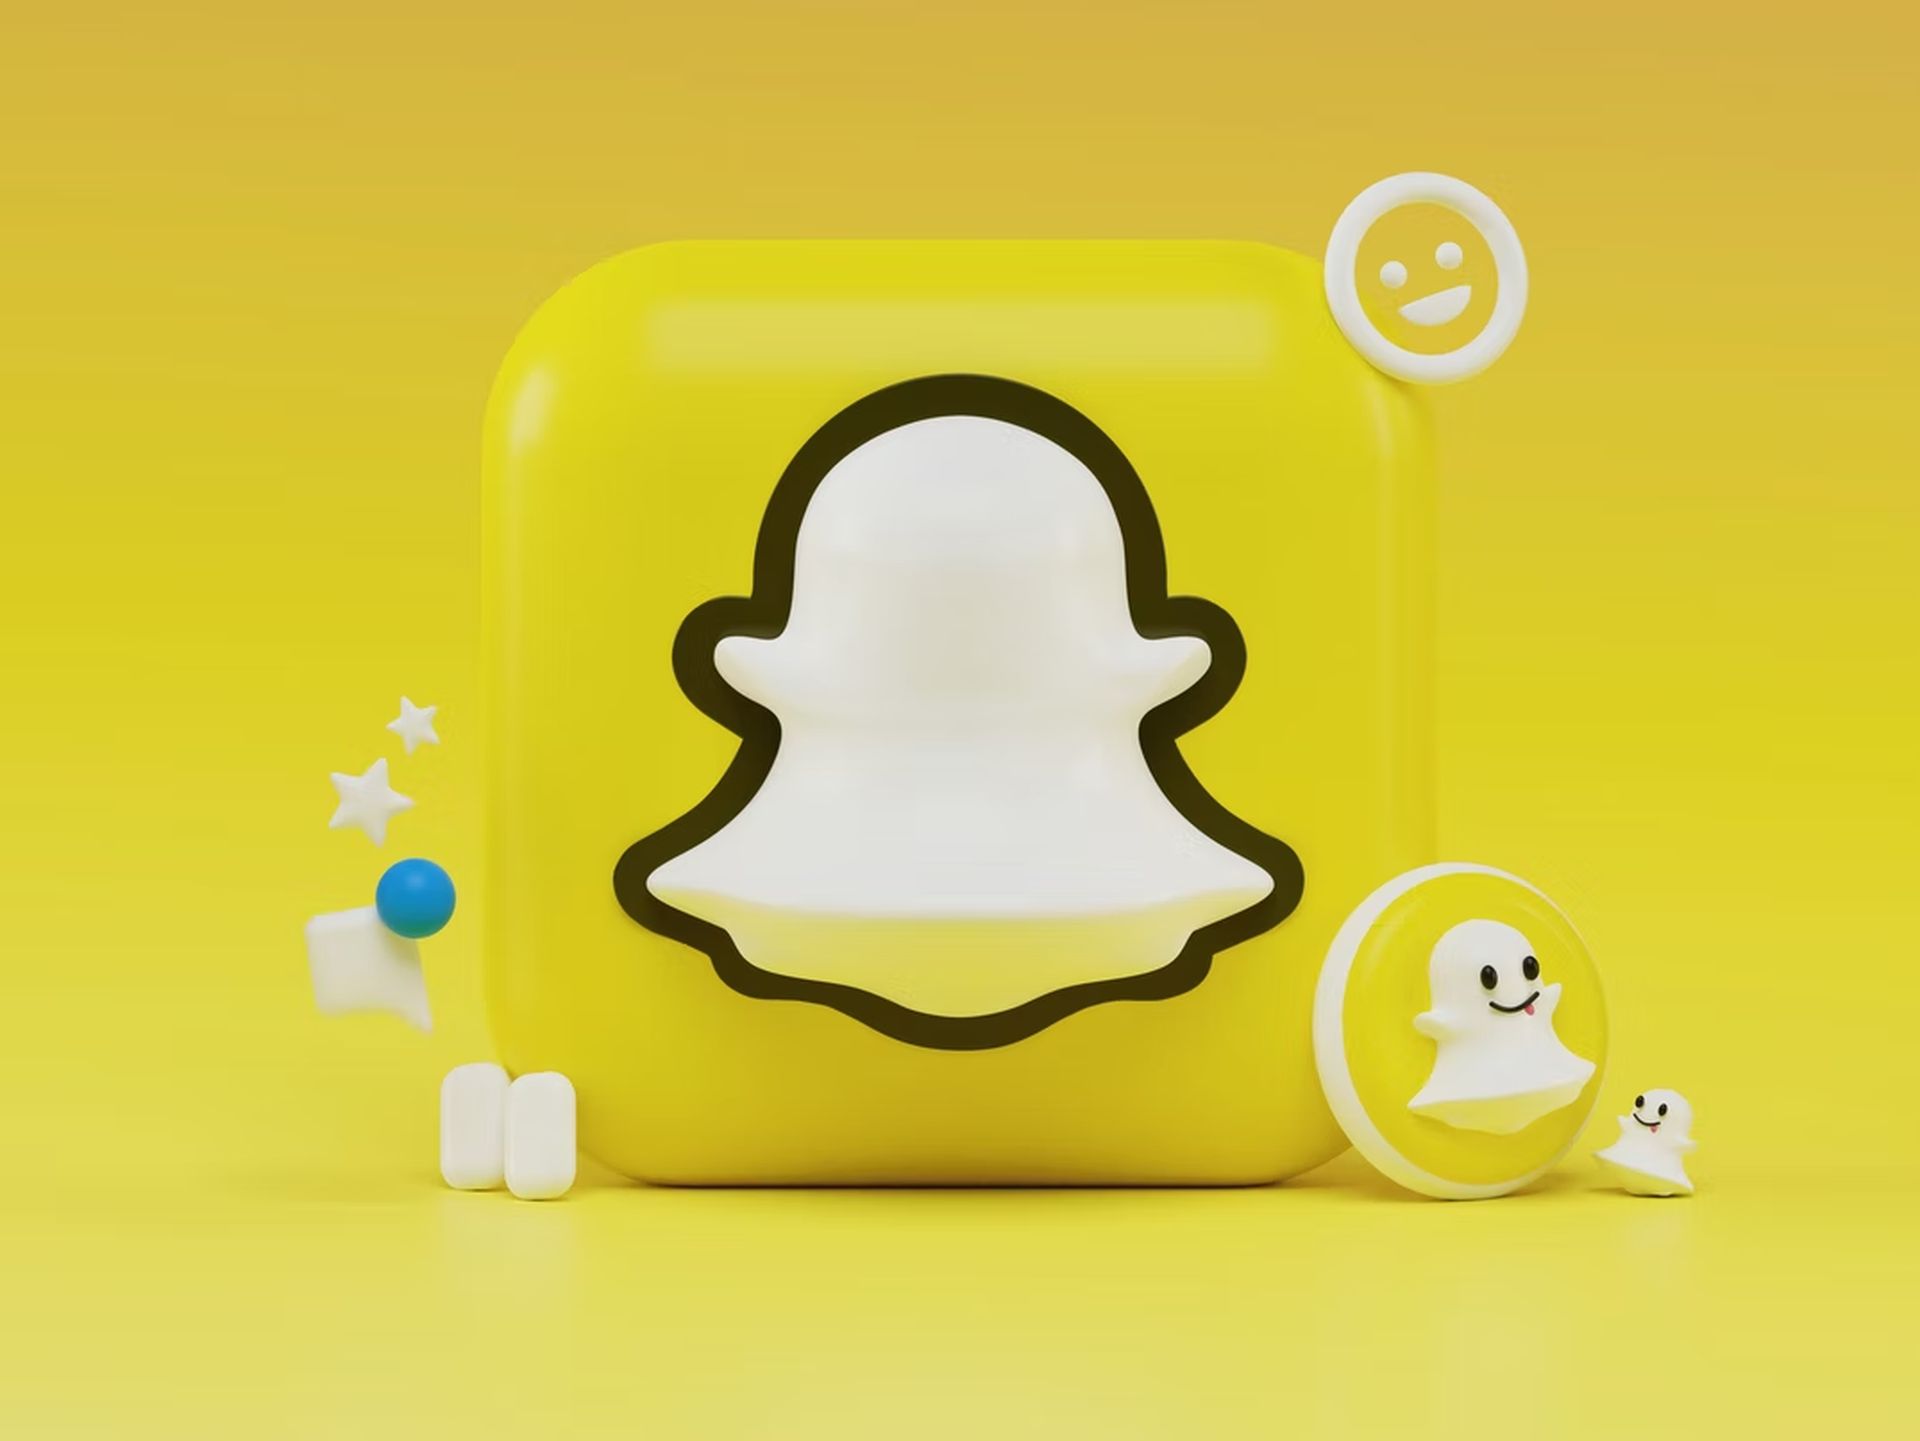 With the release of Snapchat Web, the platform is expanding its platform beyond smartphones for the first time, bringing capabilities like snapping, messaging, and video calling to desktop computers.